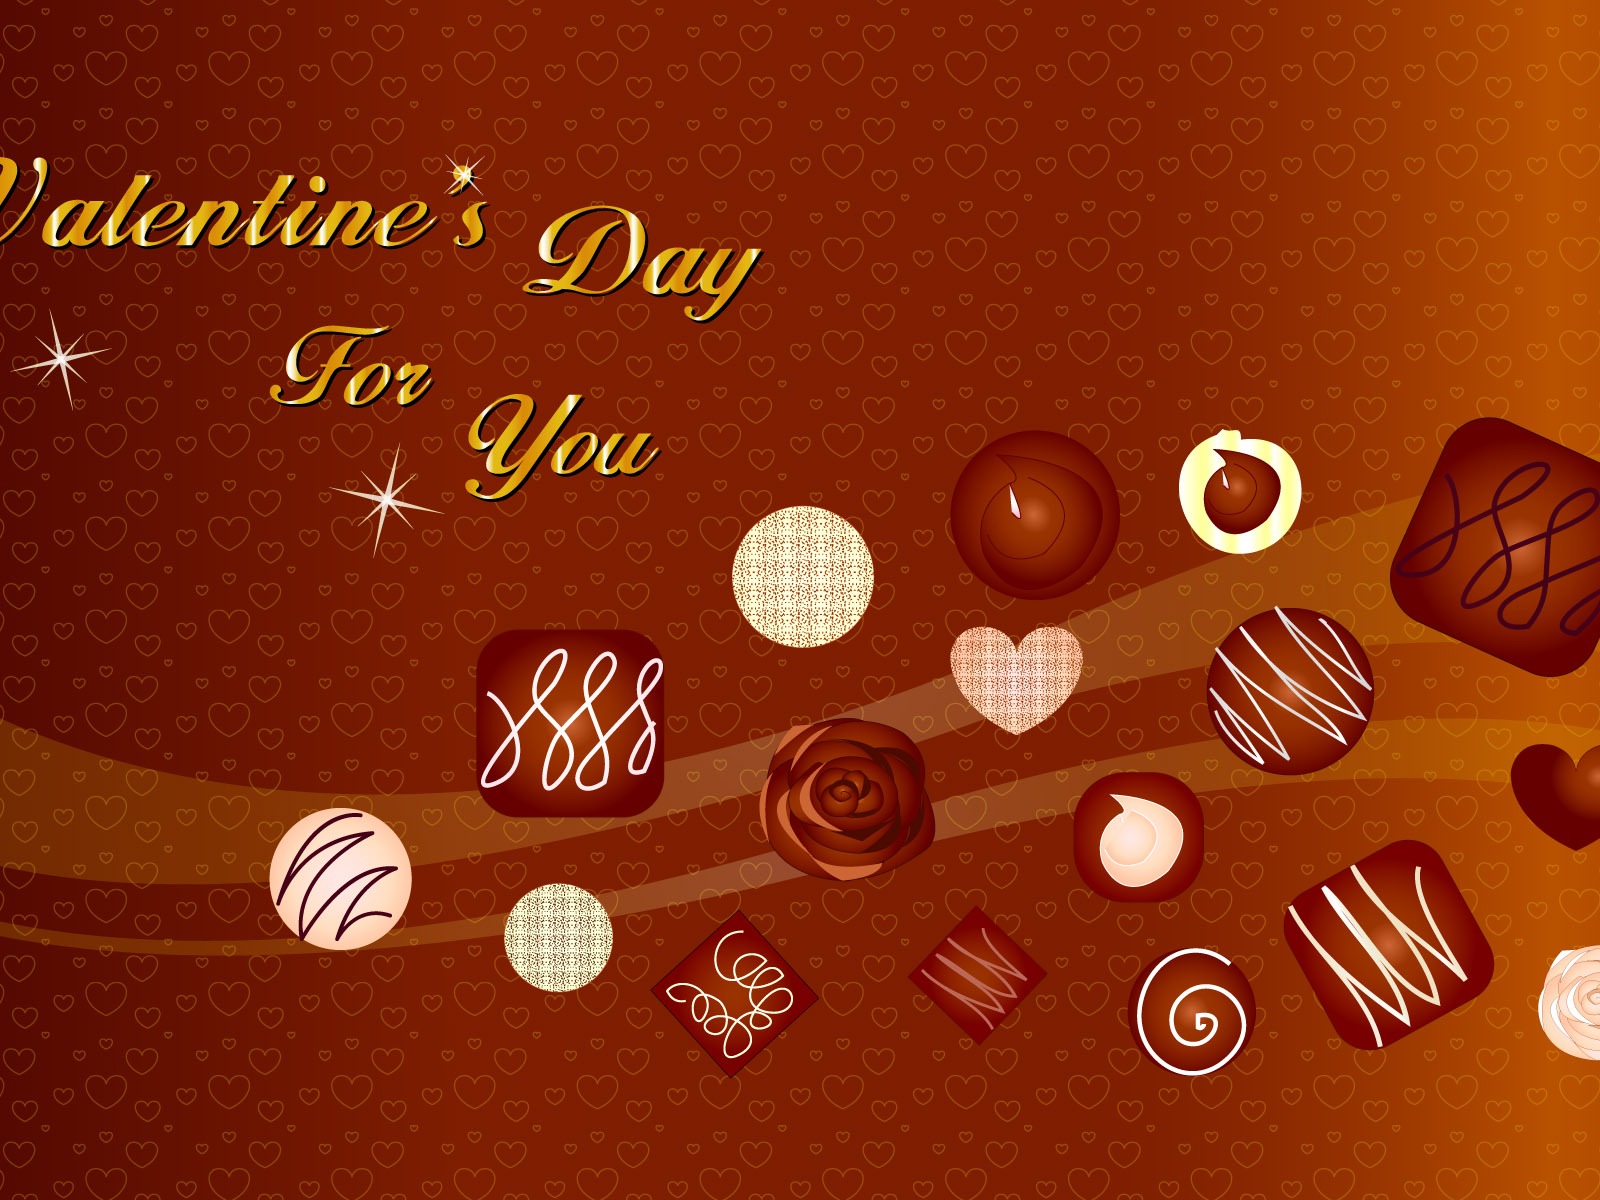 Valentine's Day Theme Wallpapers (1) #3 - 1600x1200